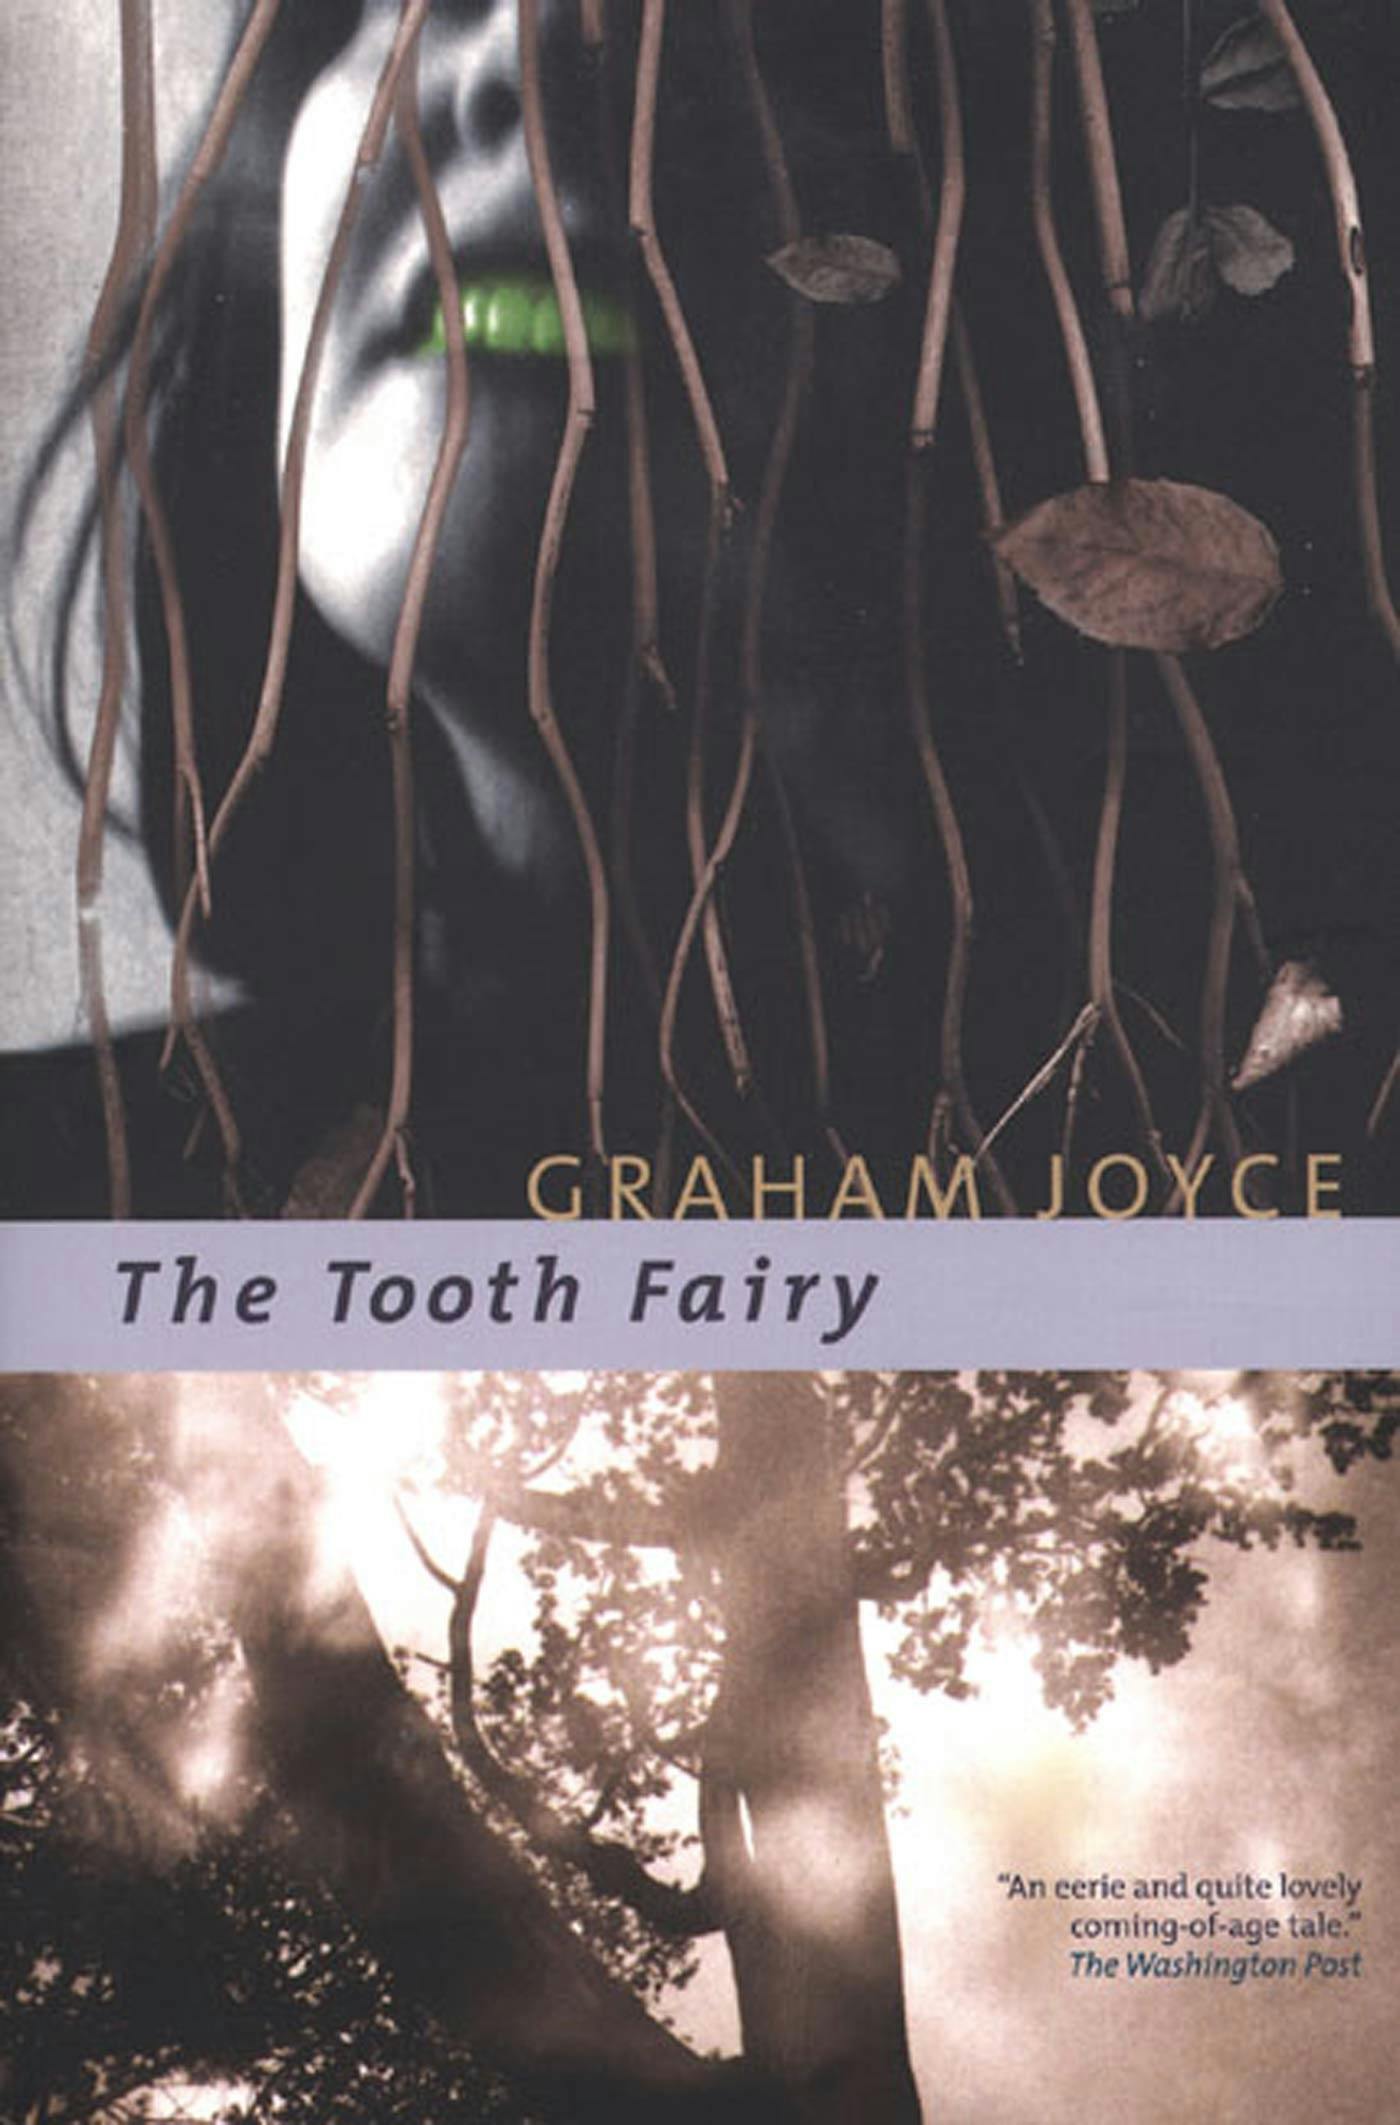 Cover for the book titled as: The Tooth Fairy